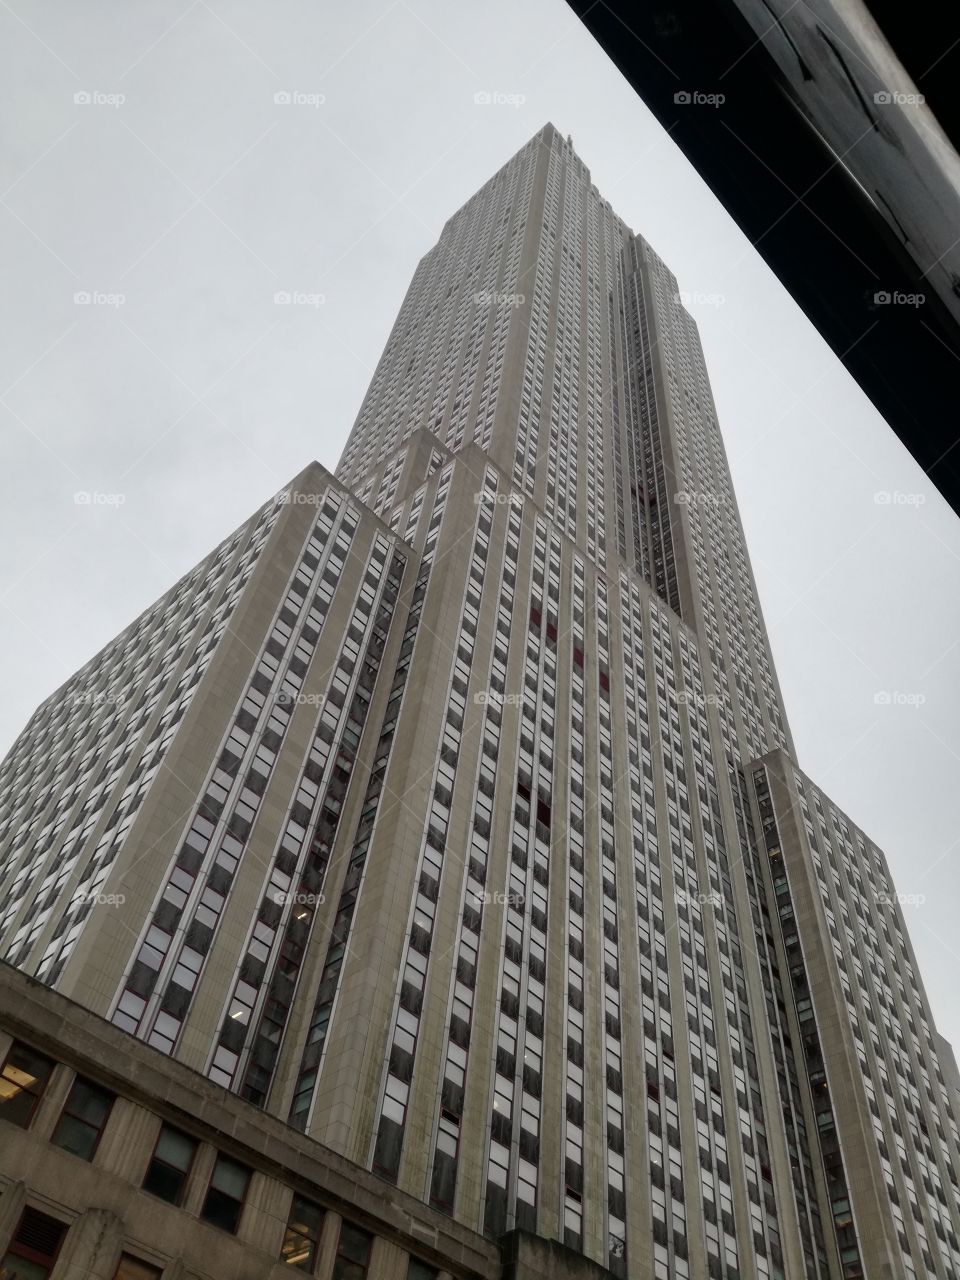 empire state building cloudy